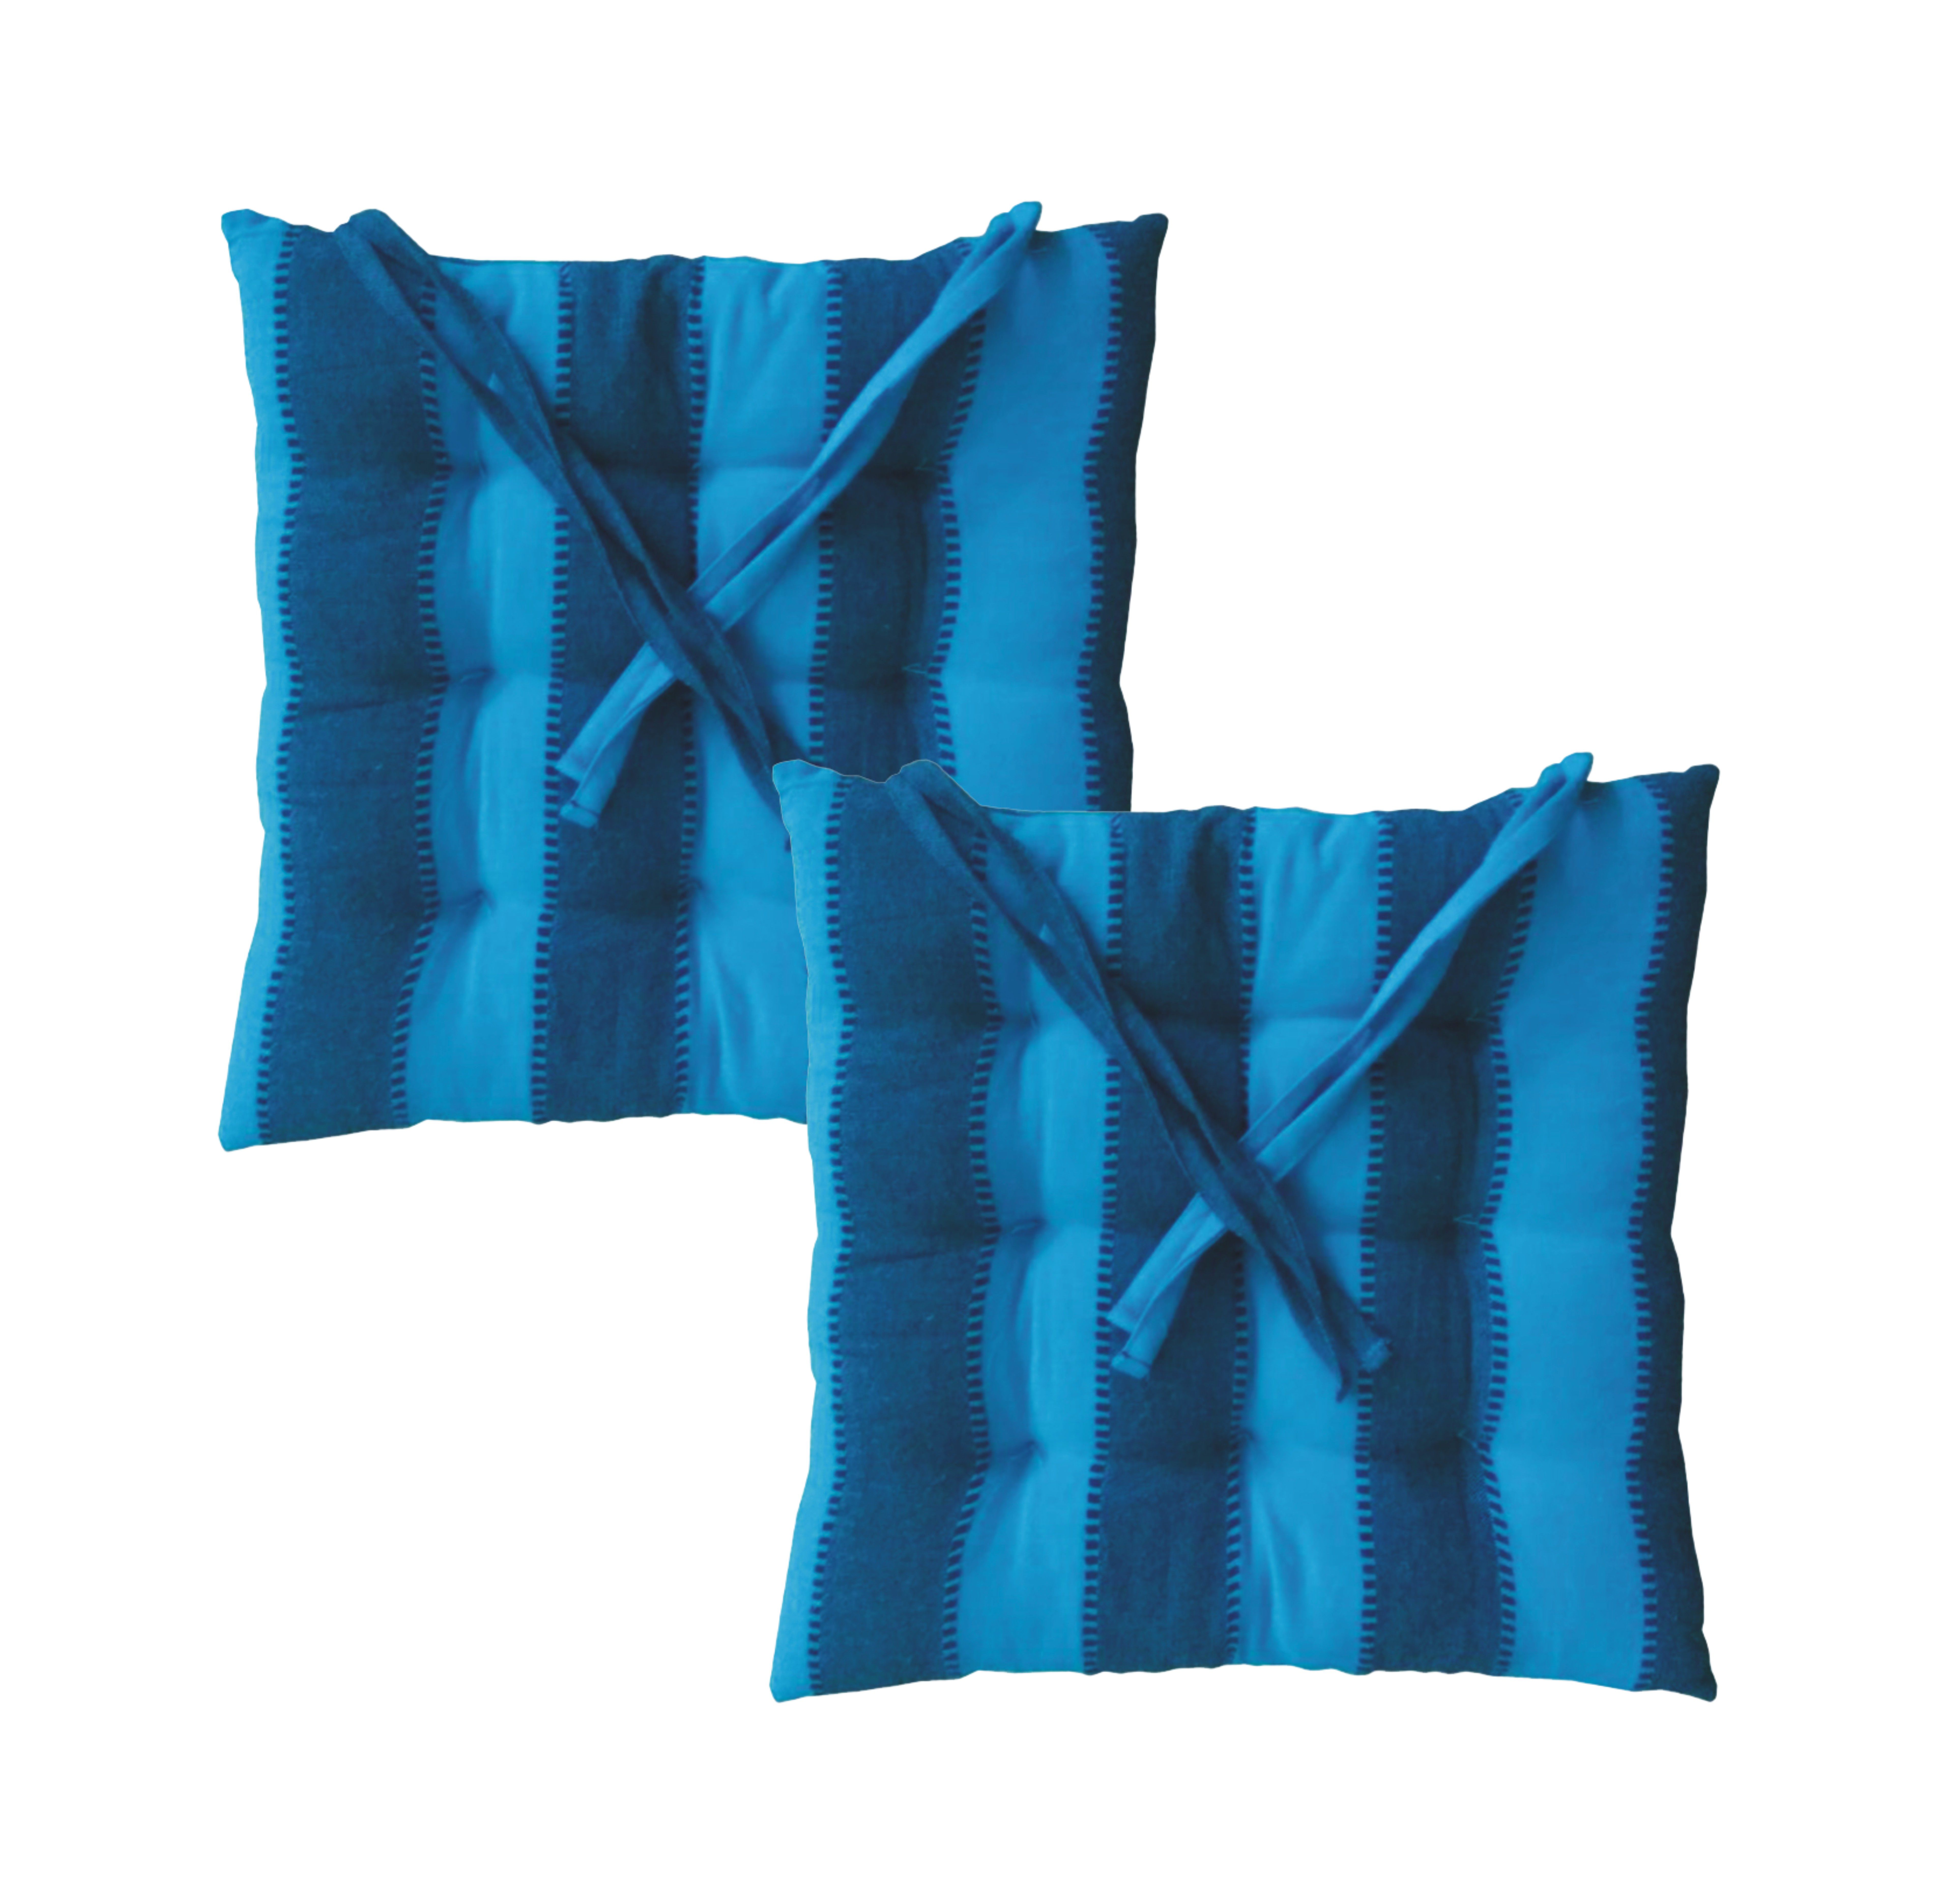     			SBN New Life Style Set of 2 Blue Cotton Chair Pads